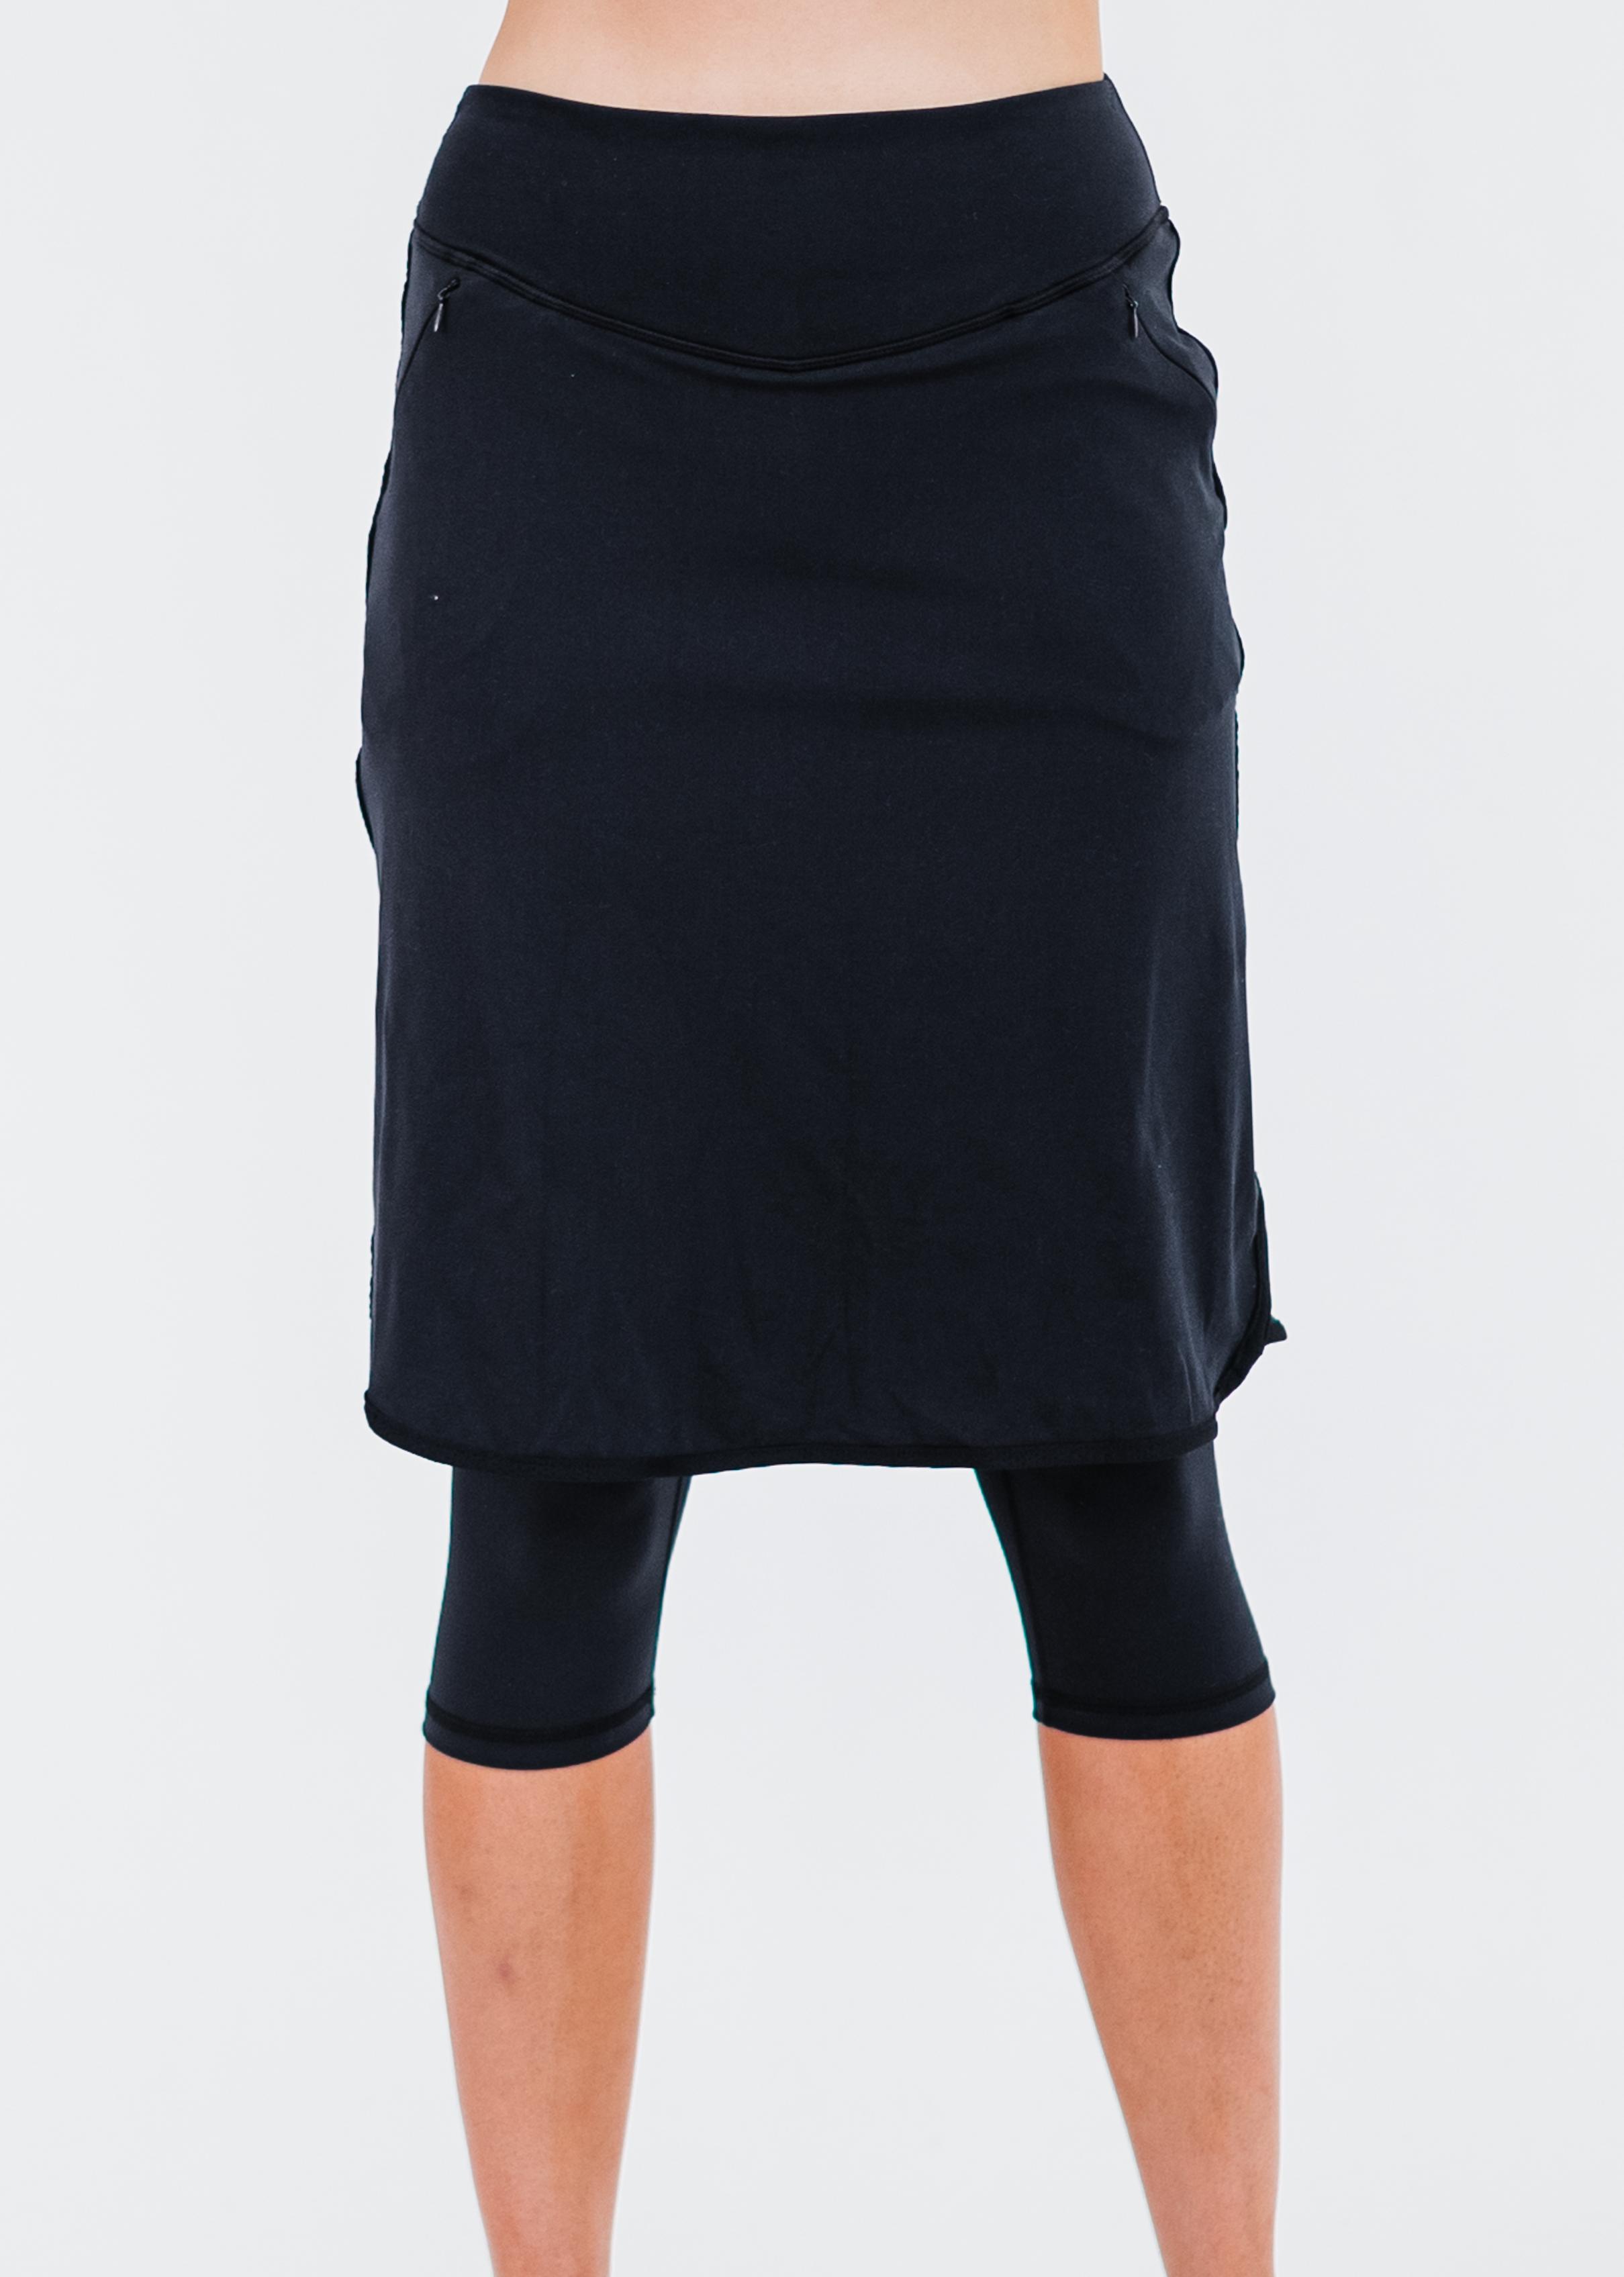 Pencil athletic Swim skirt with long leggings attached